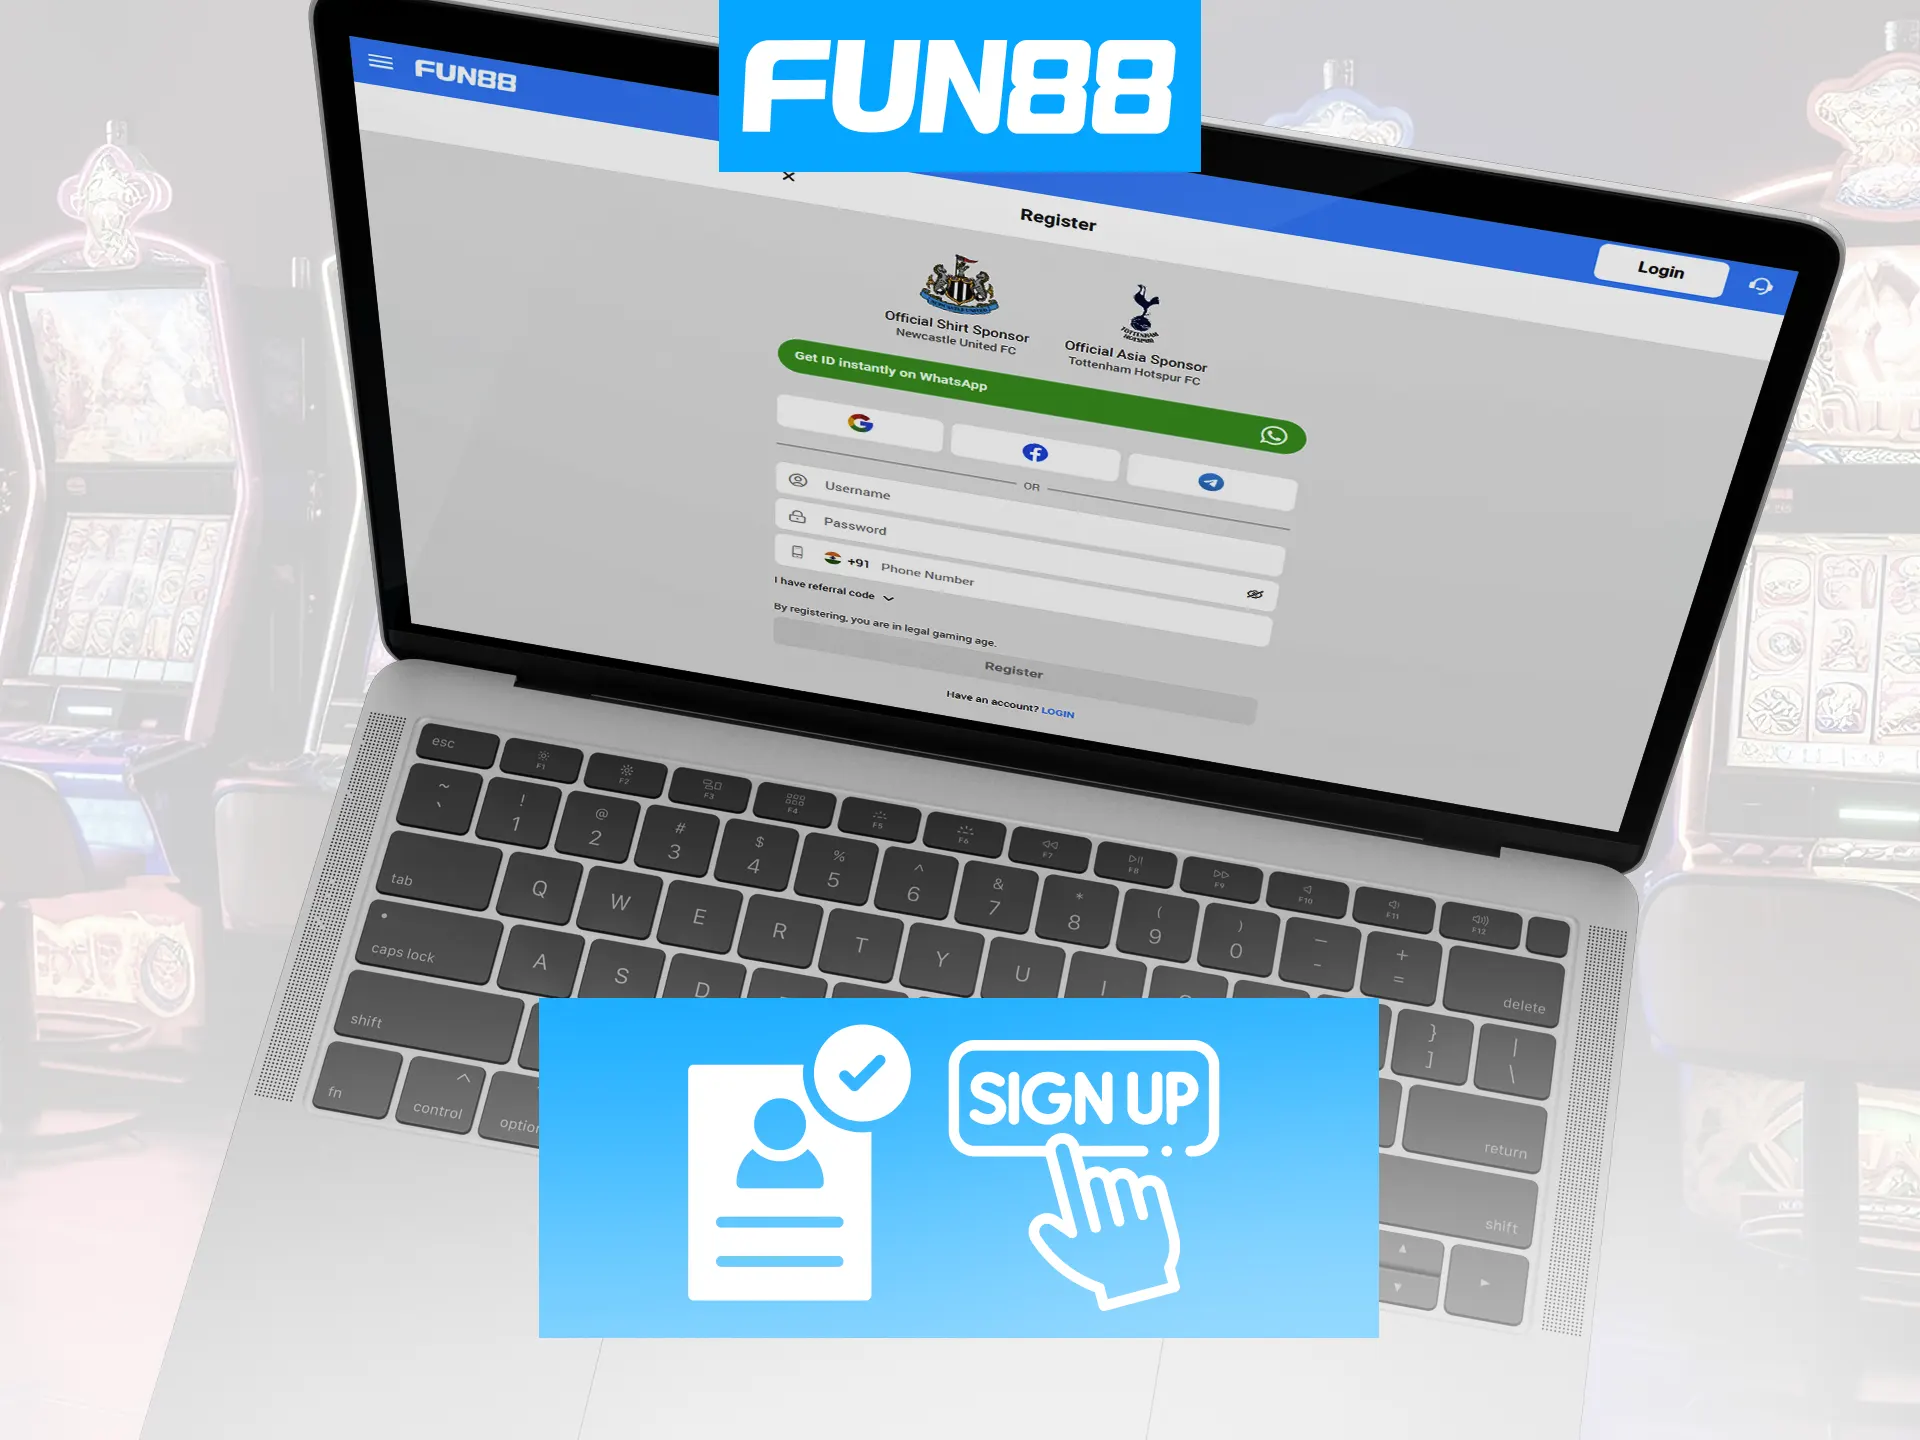 Fun88 sign-up is a quick process: enter details, finalize, and verify documents.